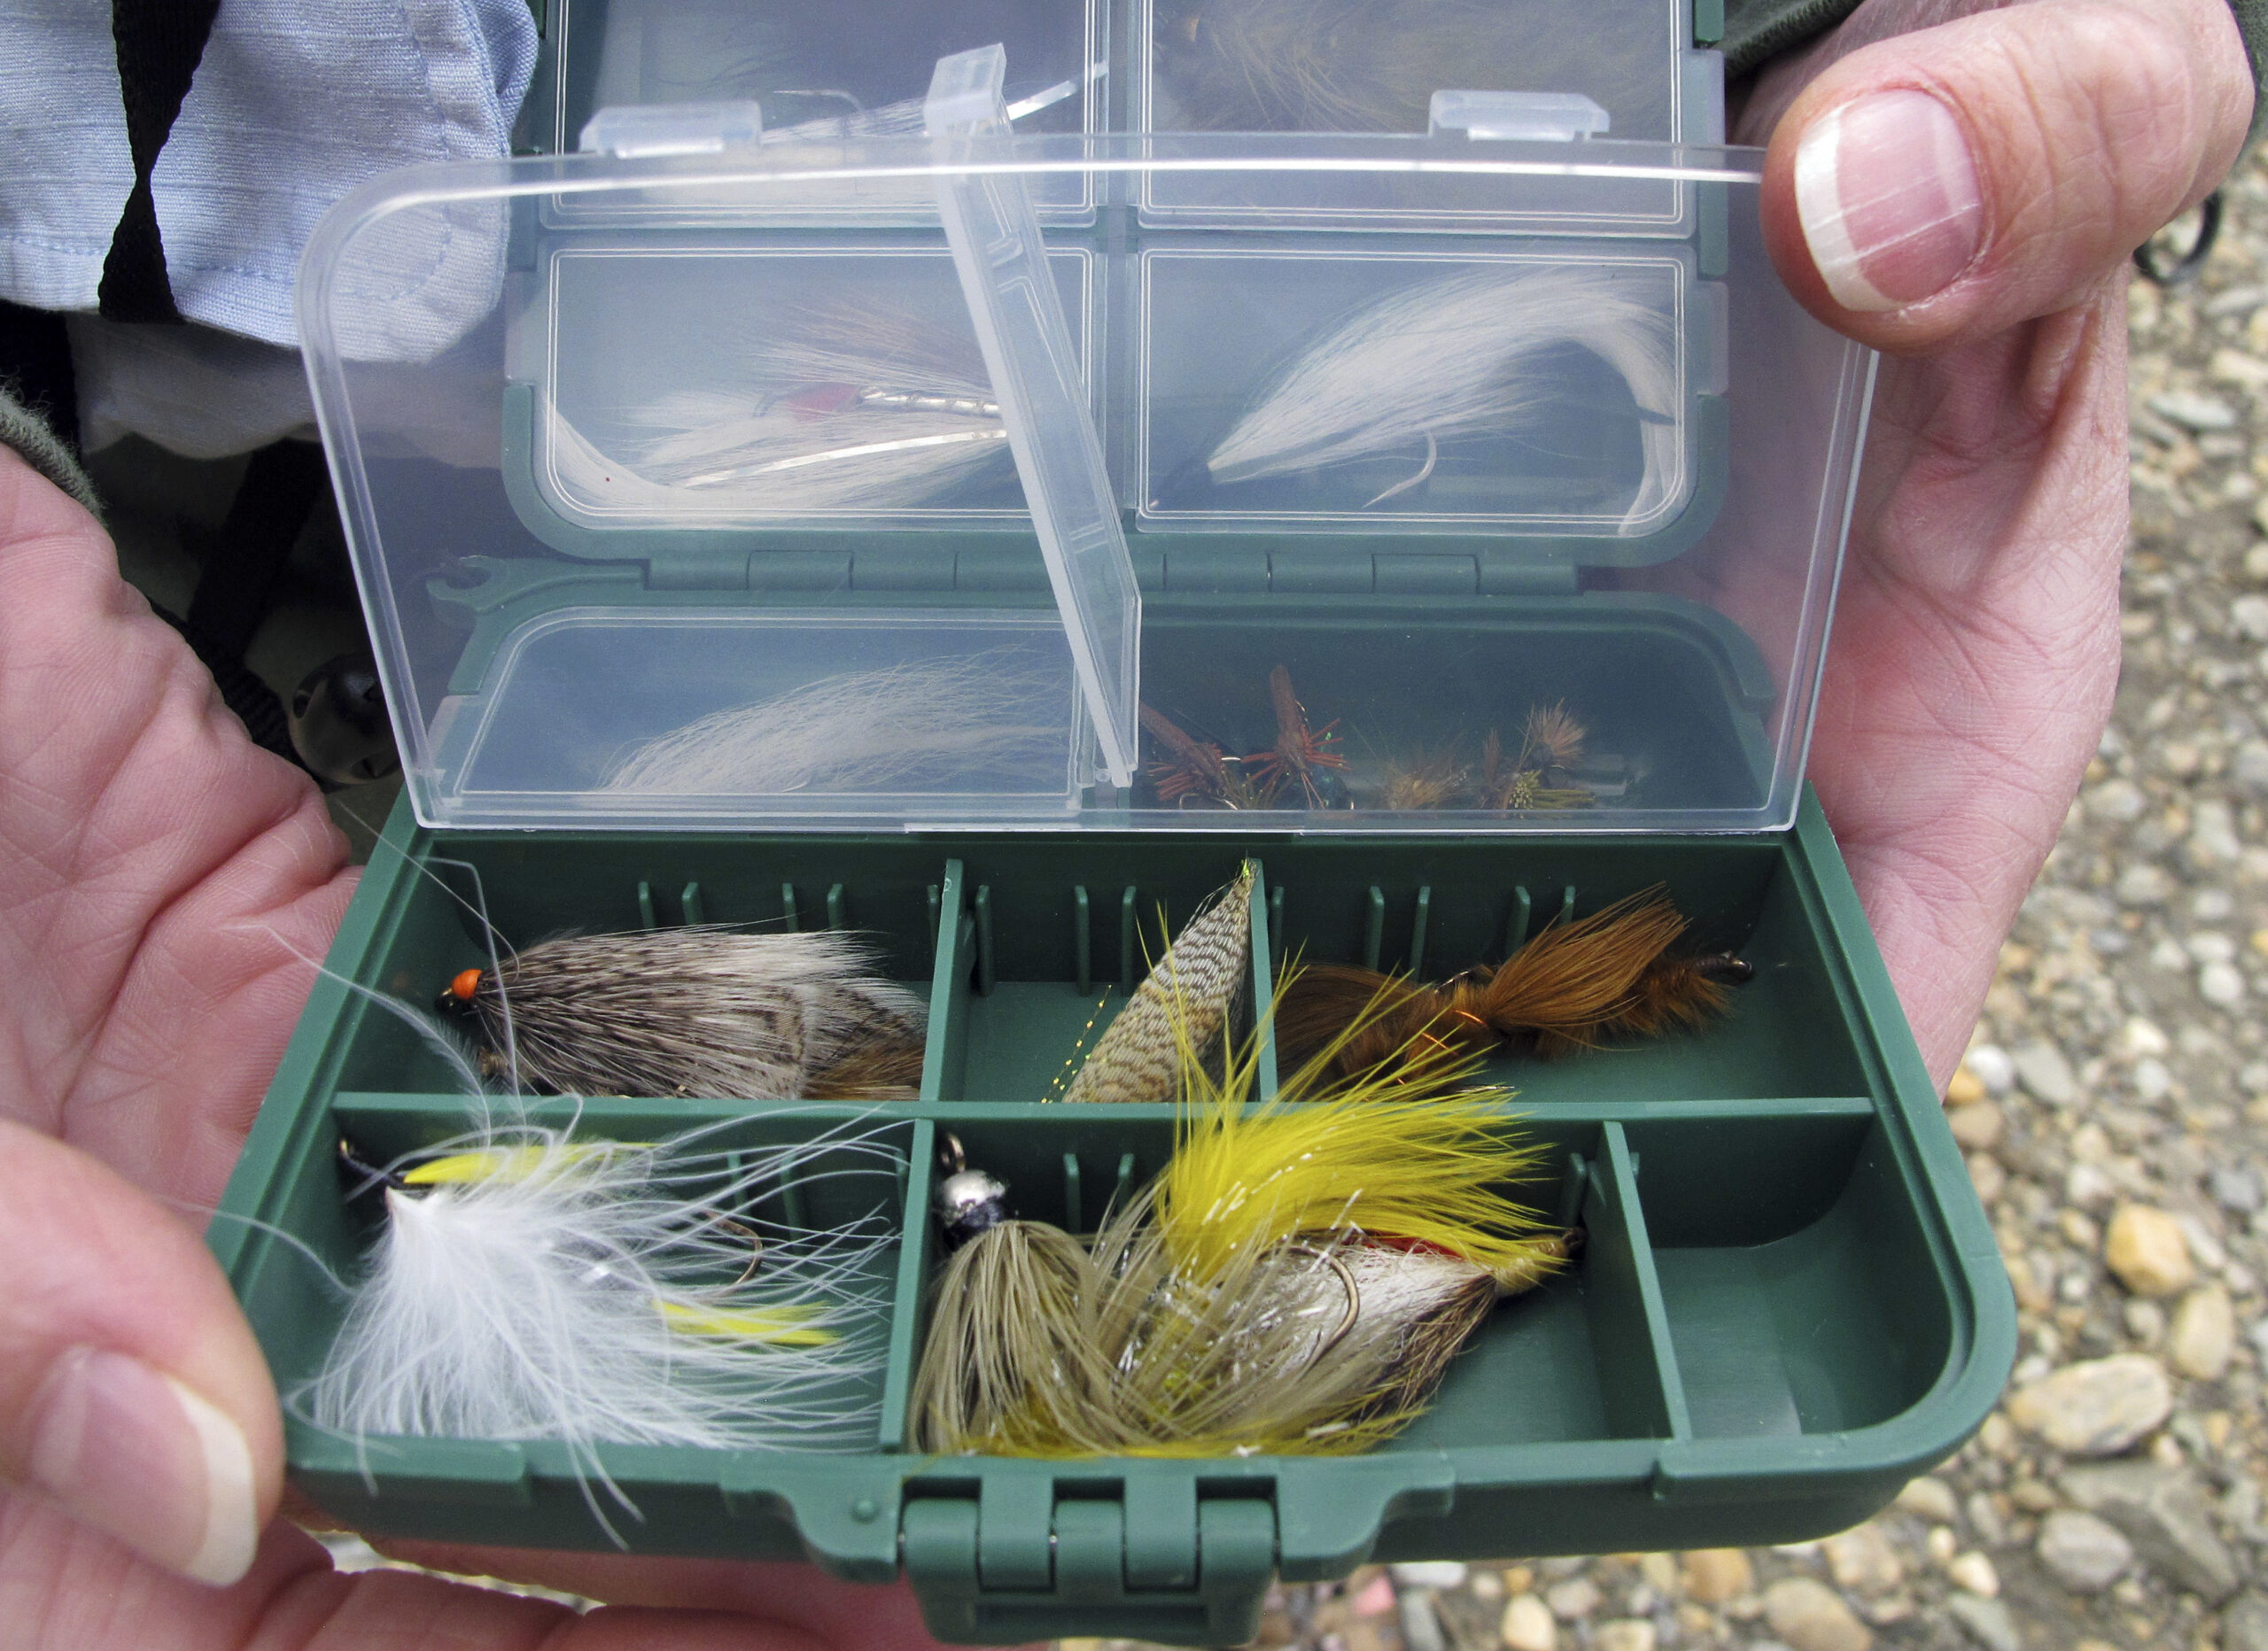 A fly fishing guide displays a box of flies during a fly fishing retreat